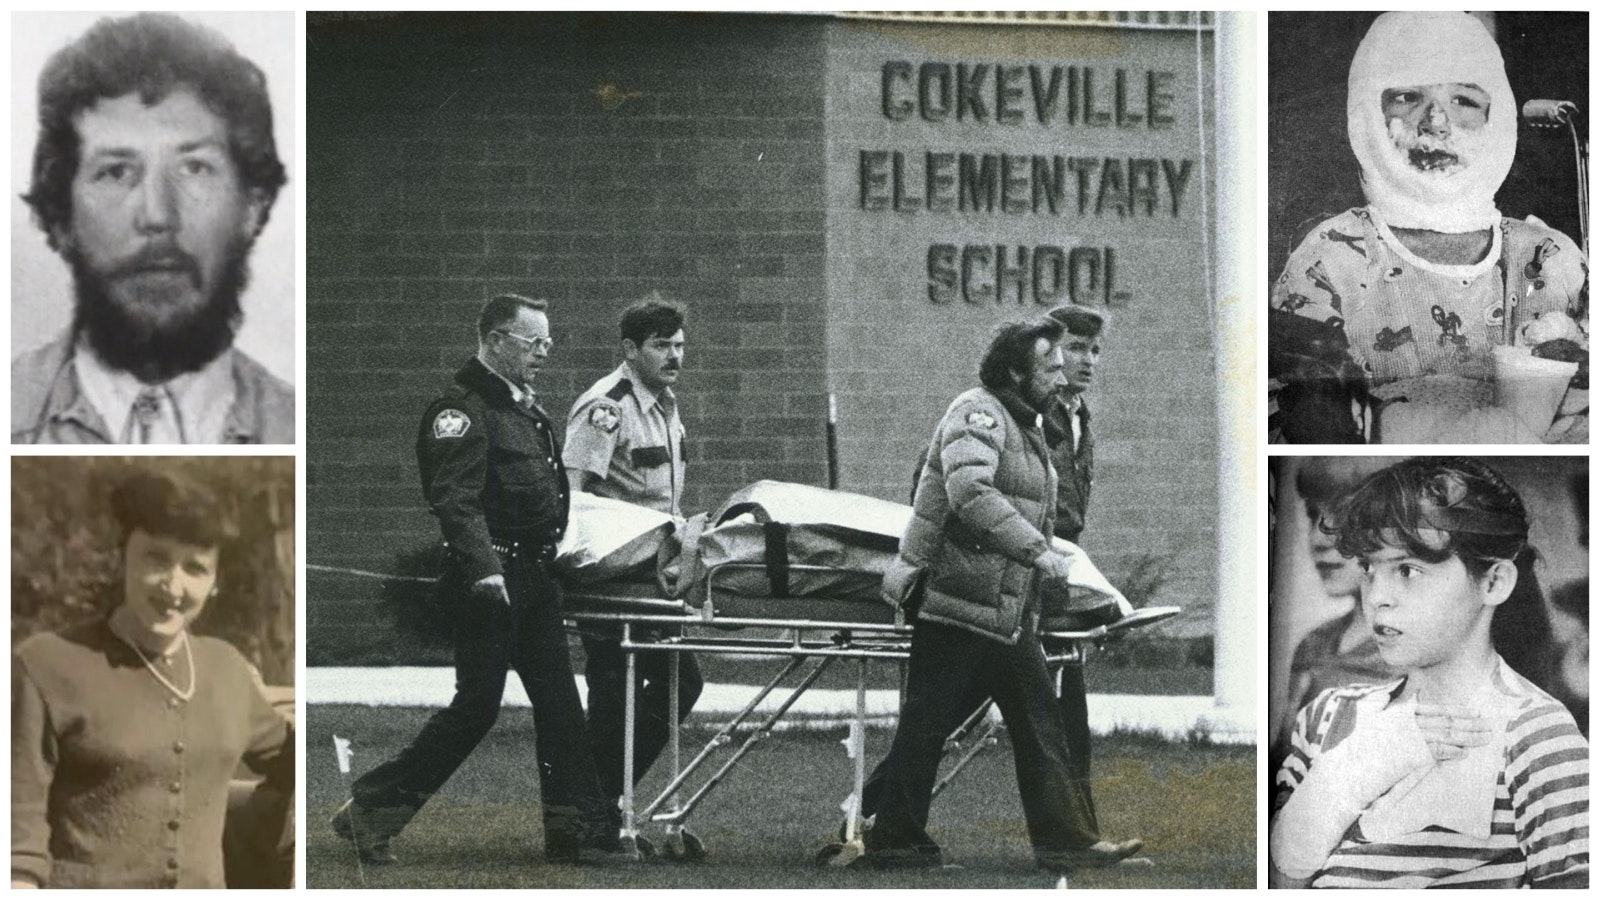 Thursday is the 38th anniversary of the Cokeville Elementary School bombing, which nearly was the scene of the worst school incident in U.S. history. While the bomb injured 79 people, the only deaths were the bomber and his wife.